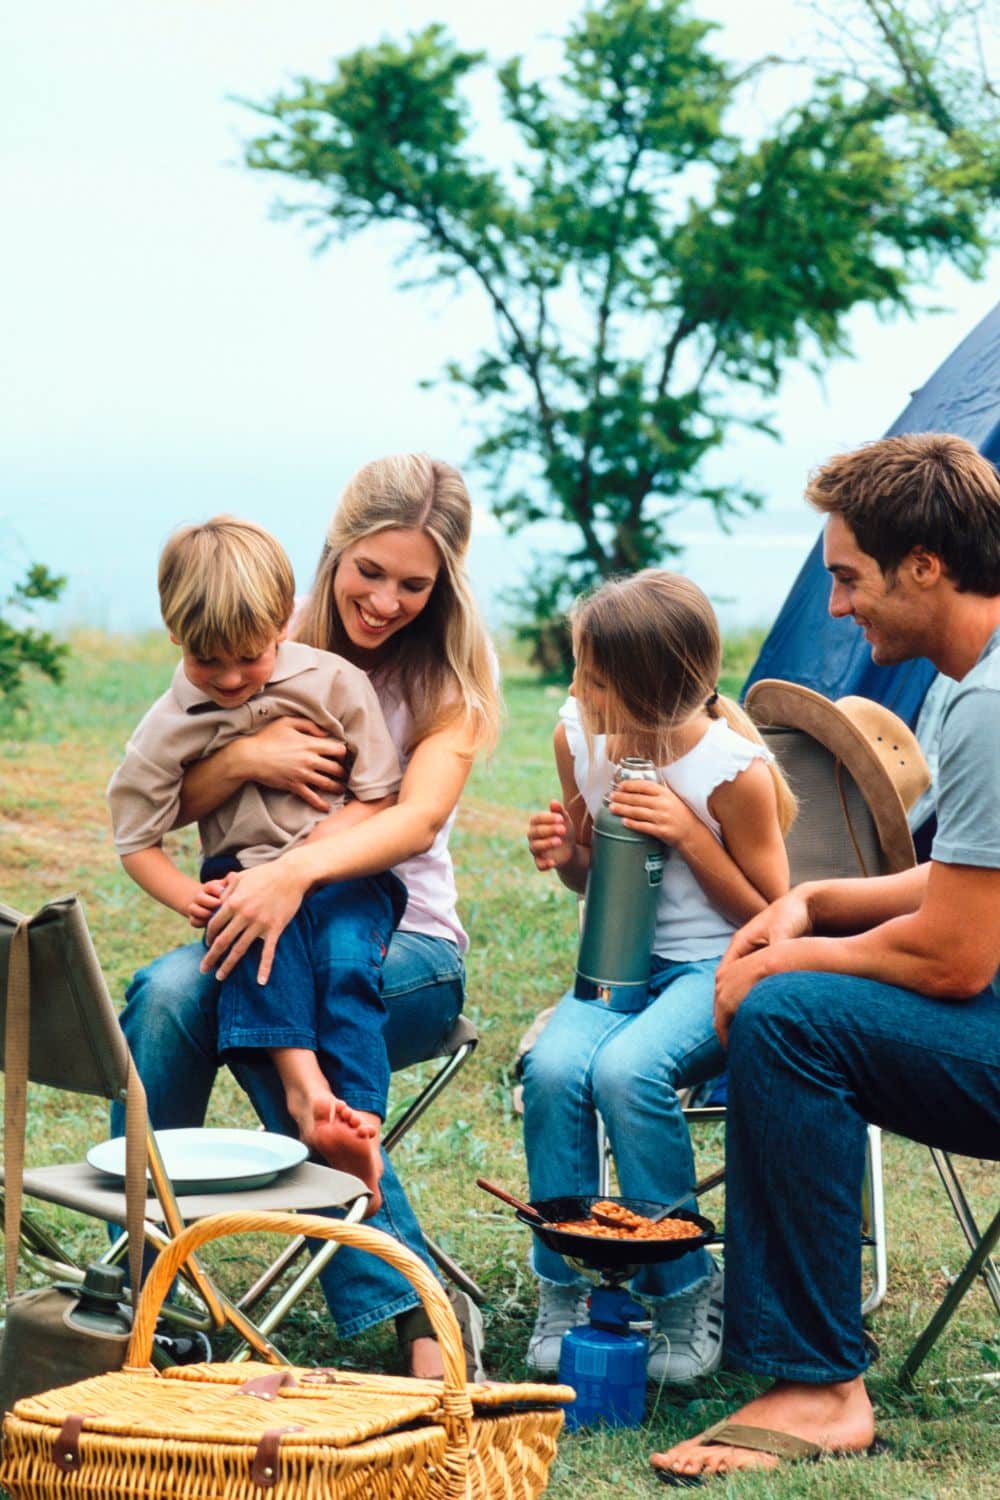 A Guide To Having A Better & More Fun Family Camping Trip